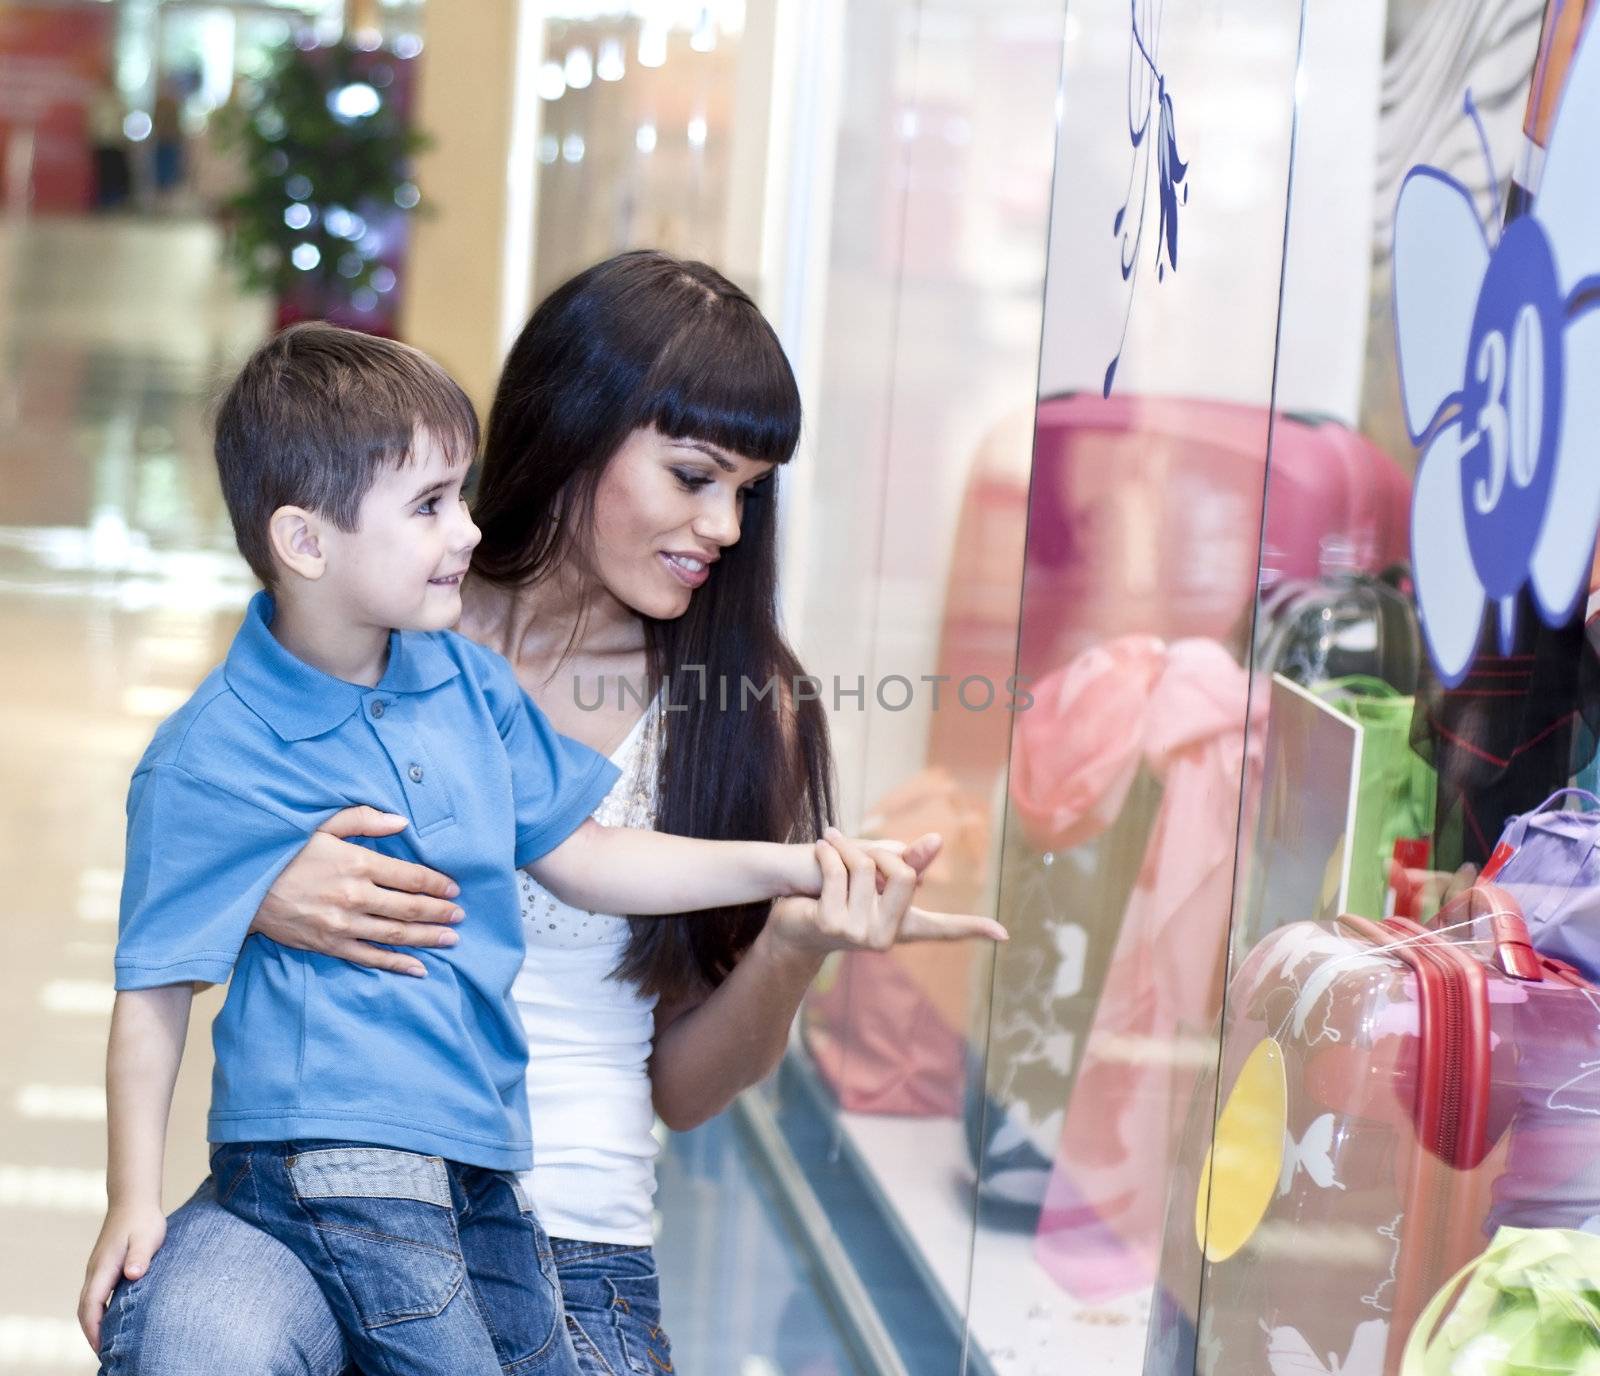 Mum and the son discuss purchases in shopping center